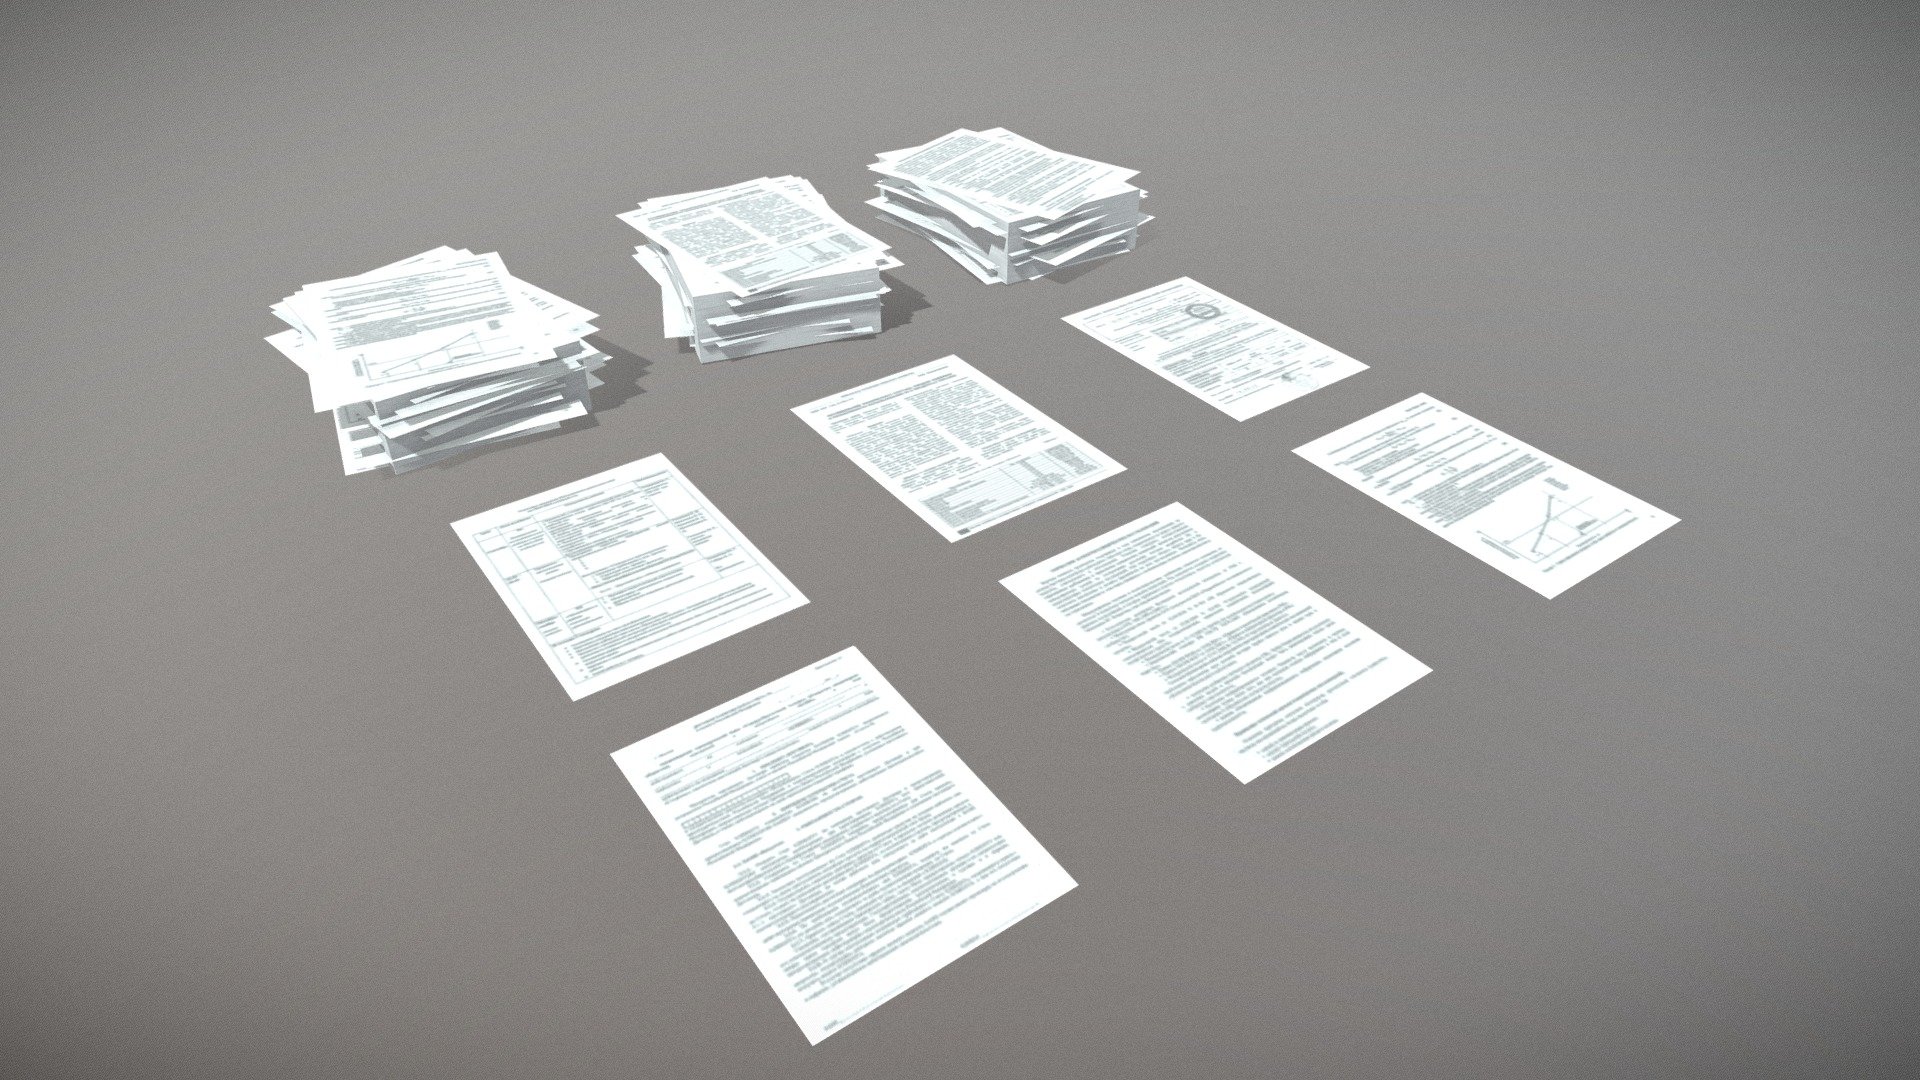 Hello everyone, its my set of models of paper sheets.

It has textures 2048/2048.

Game ready model for Unreal Engine 4 or Unity 3d model